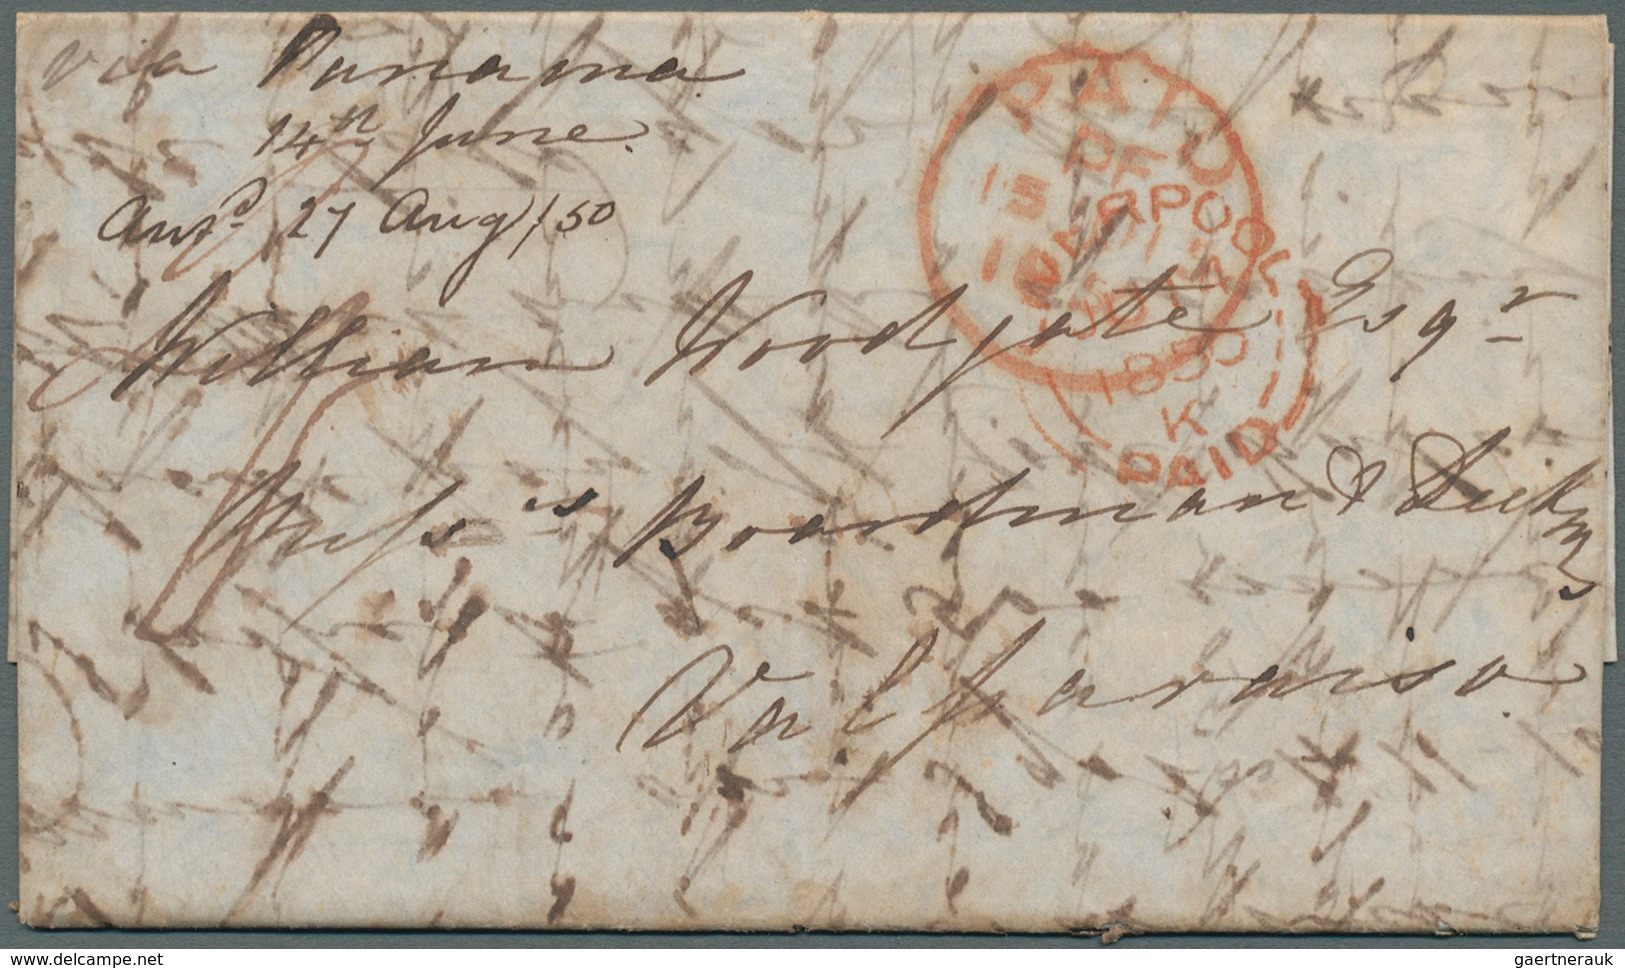 Großbritannien - Vorphilatelie: 1791/1850 ca., 360 early covers with a great variety of cancellation